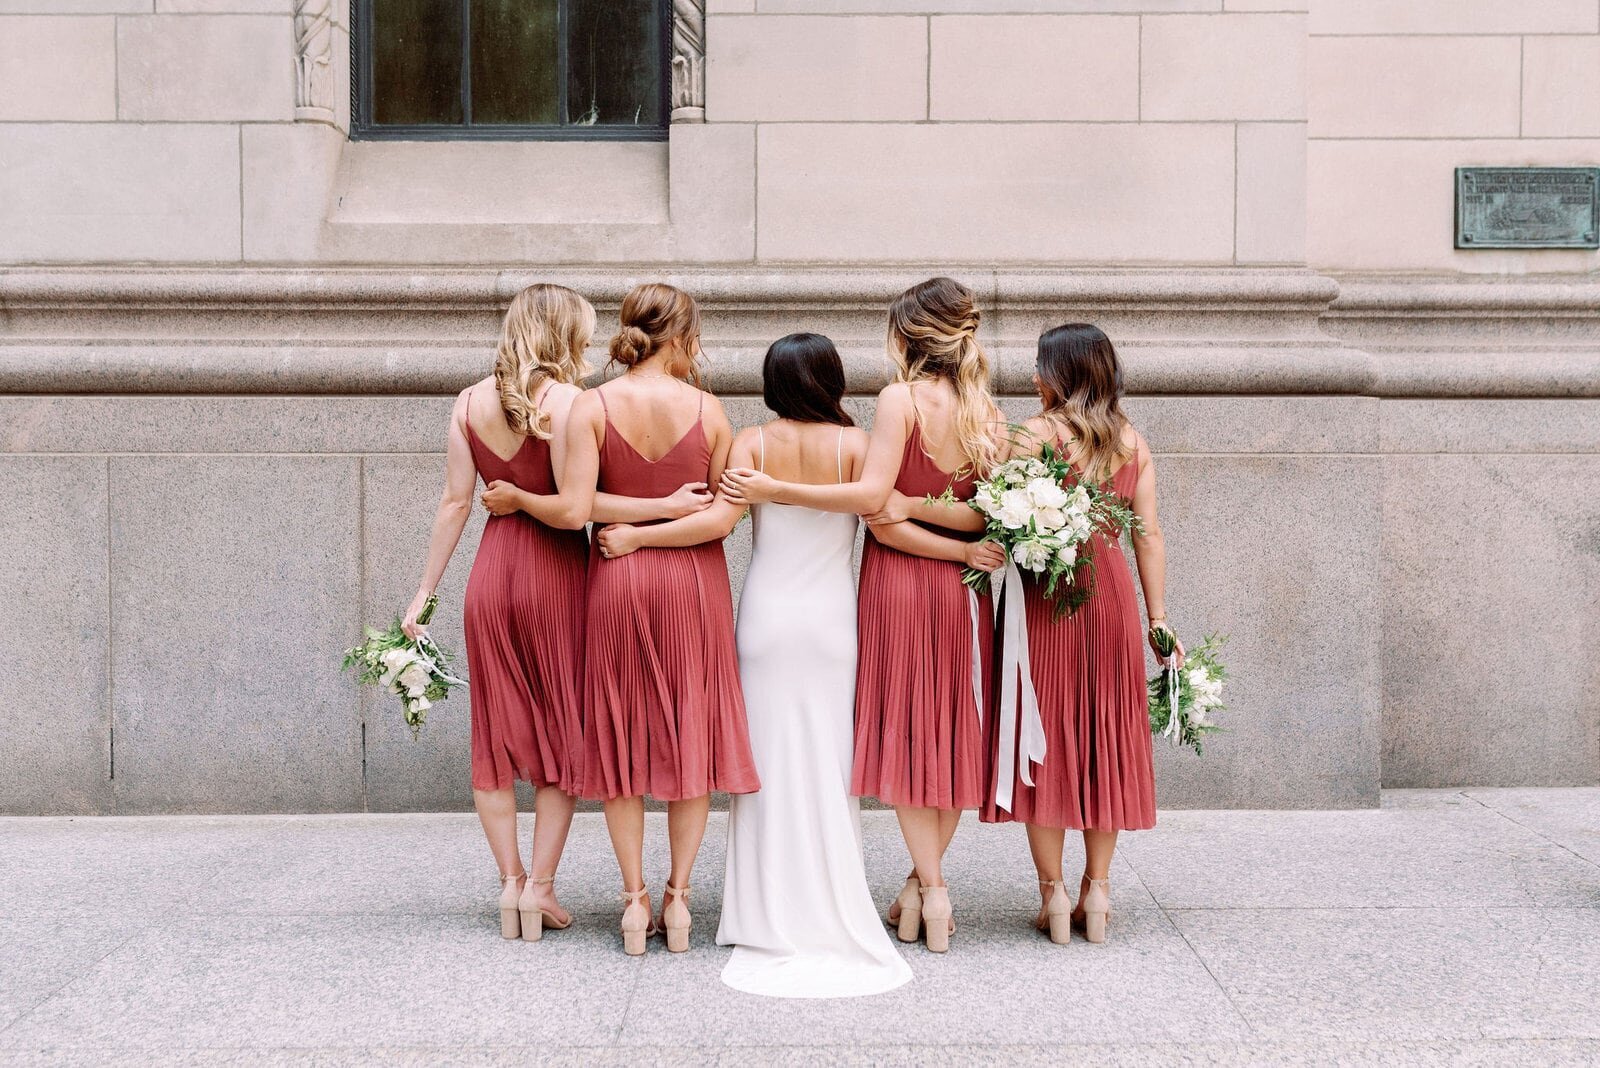 Modern Bride with bridesmaids crimson red dresses by Aritzia editorial wedding at hotel ocho toronto jacqueline james photography